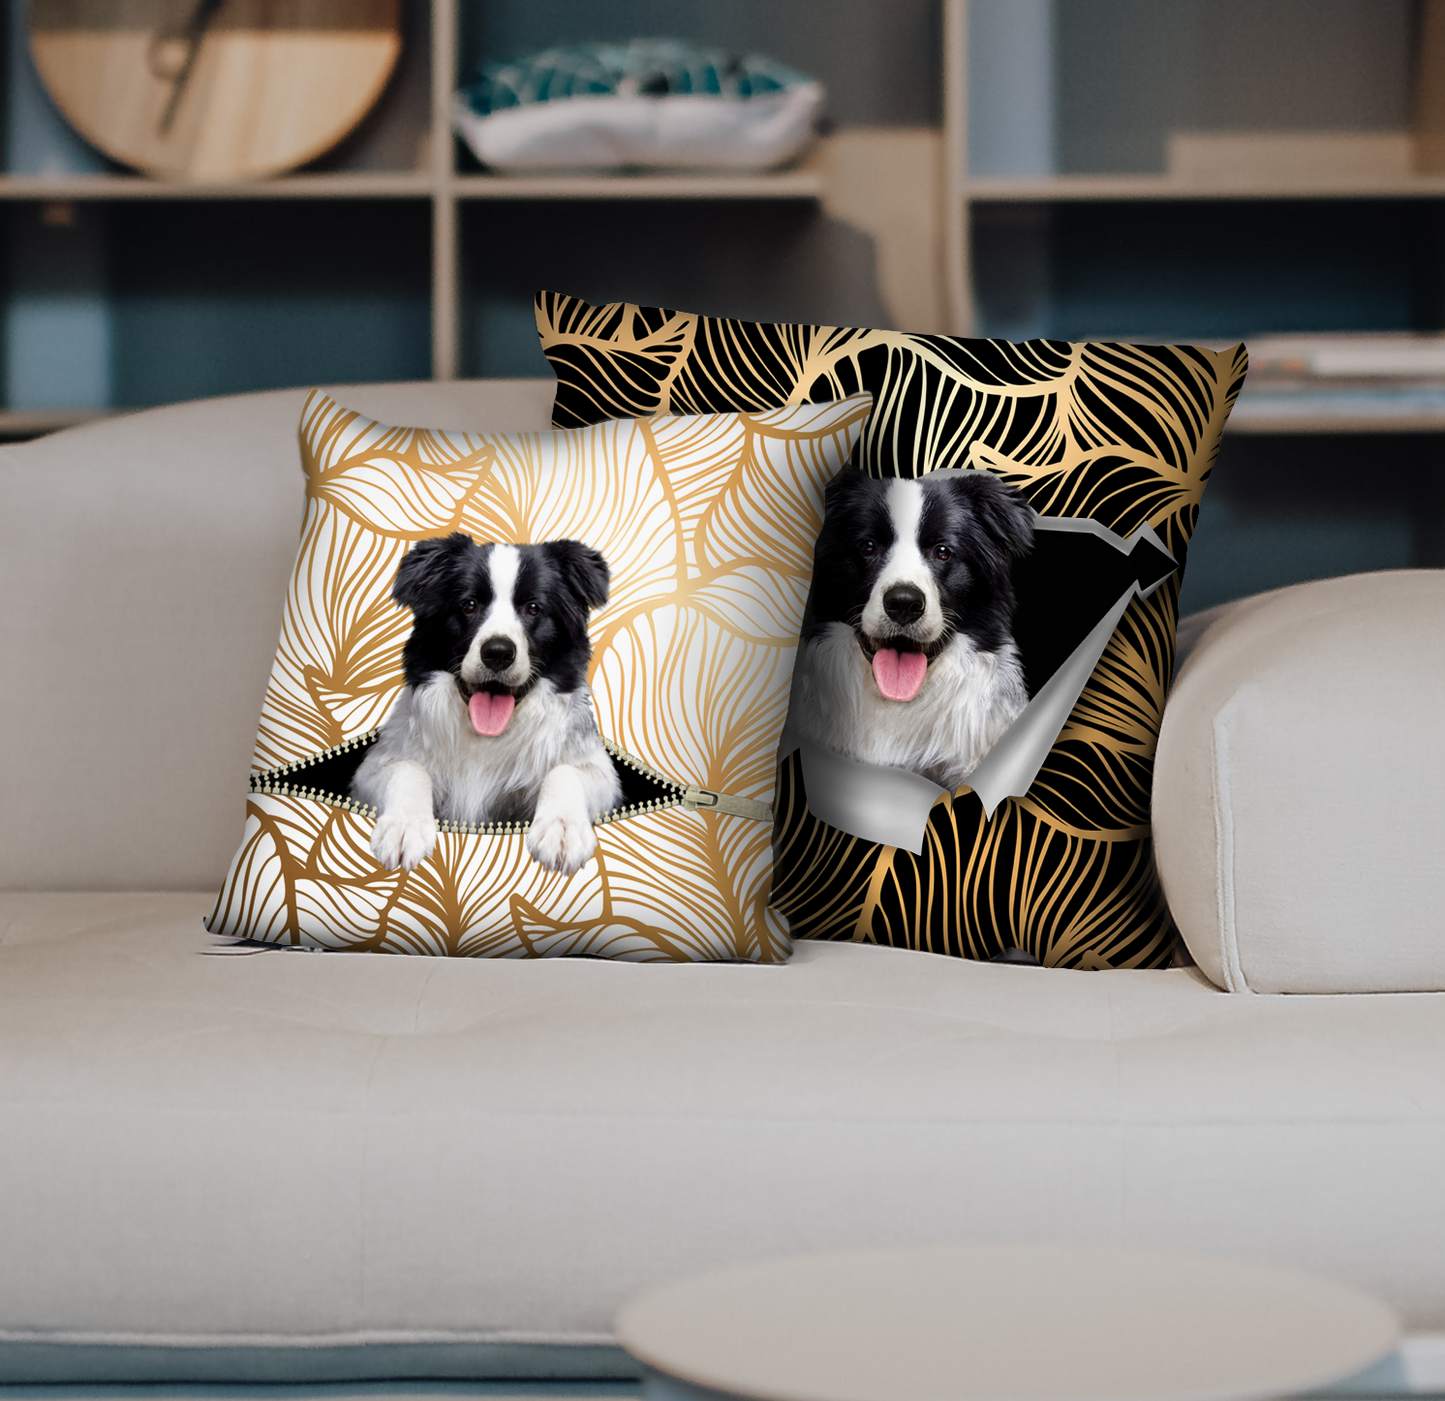 They Steal Your Couch - Border Collie Pillow Cases V1 (Set of 2)